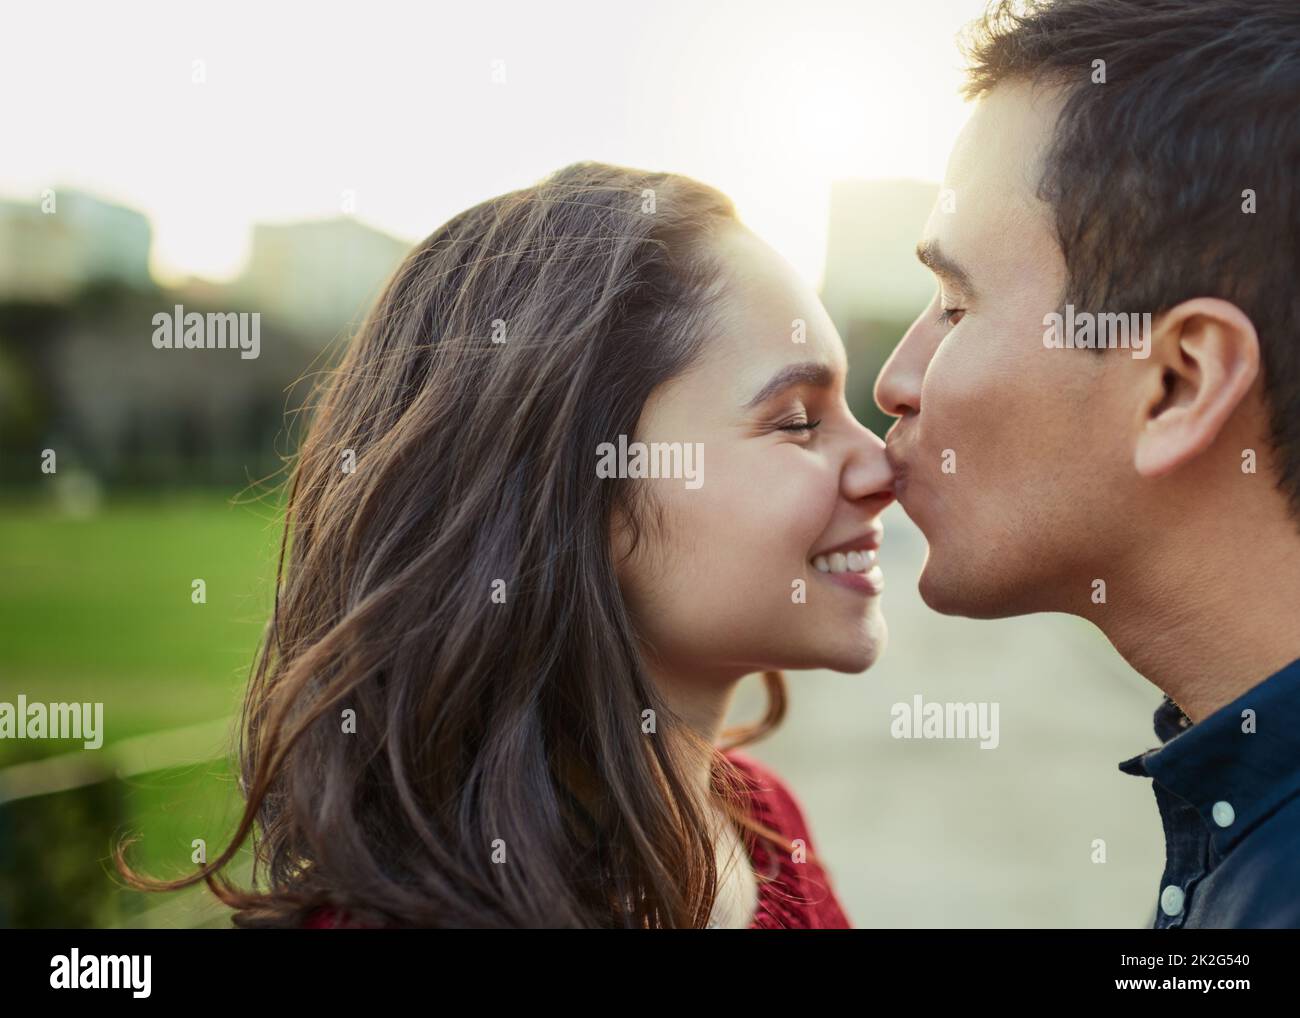 Love, nothing else needed. Shot of a young man kissing his girlfriend on the nose outdoors. Stock Photo